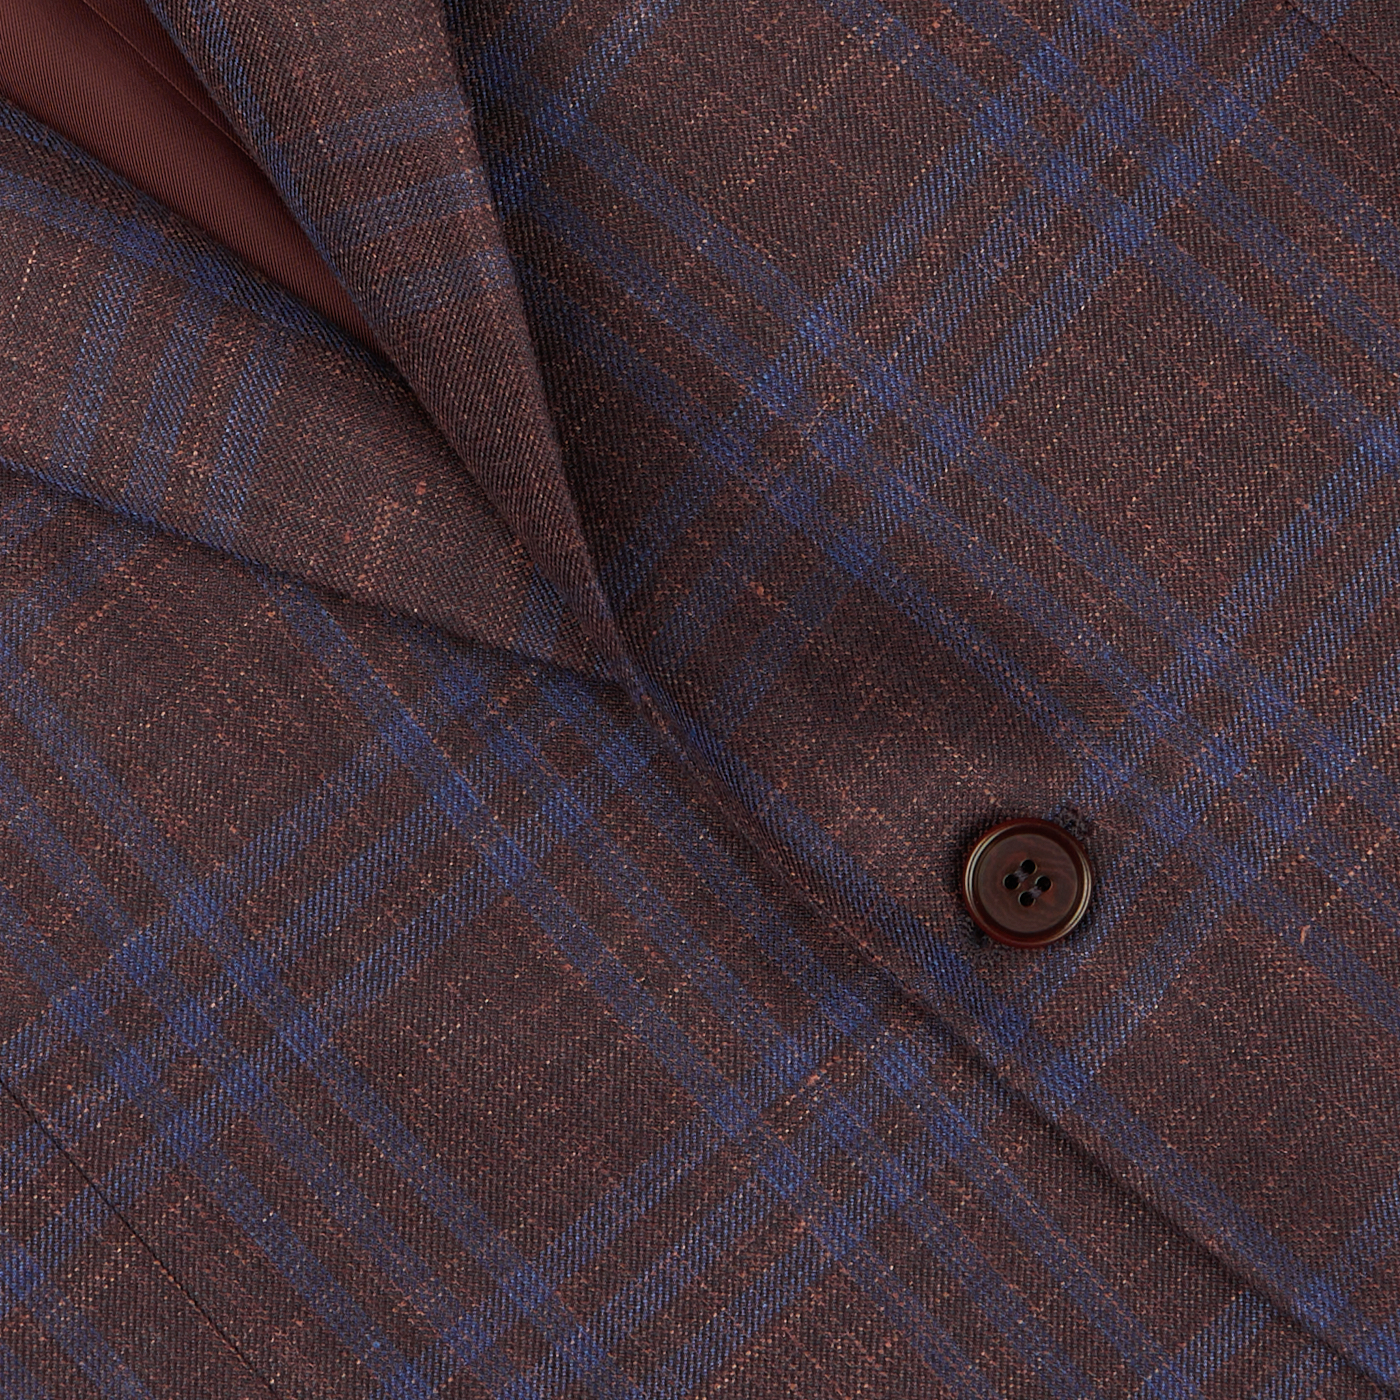 Close-up of a Canali wine-red checked fabric with a visible button, likely from a blazer.